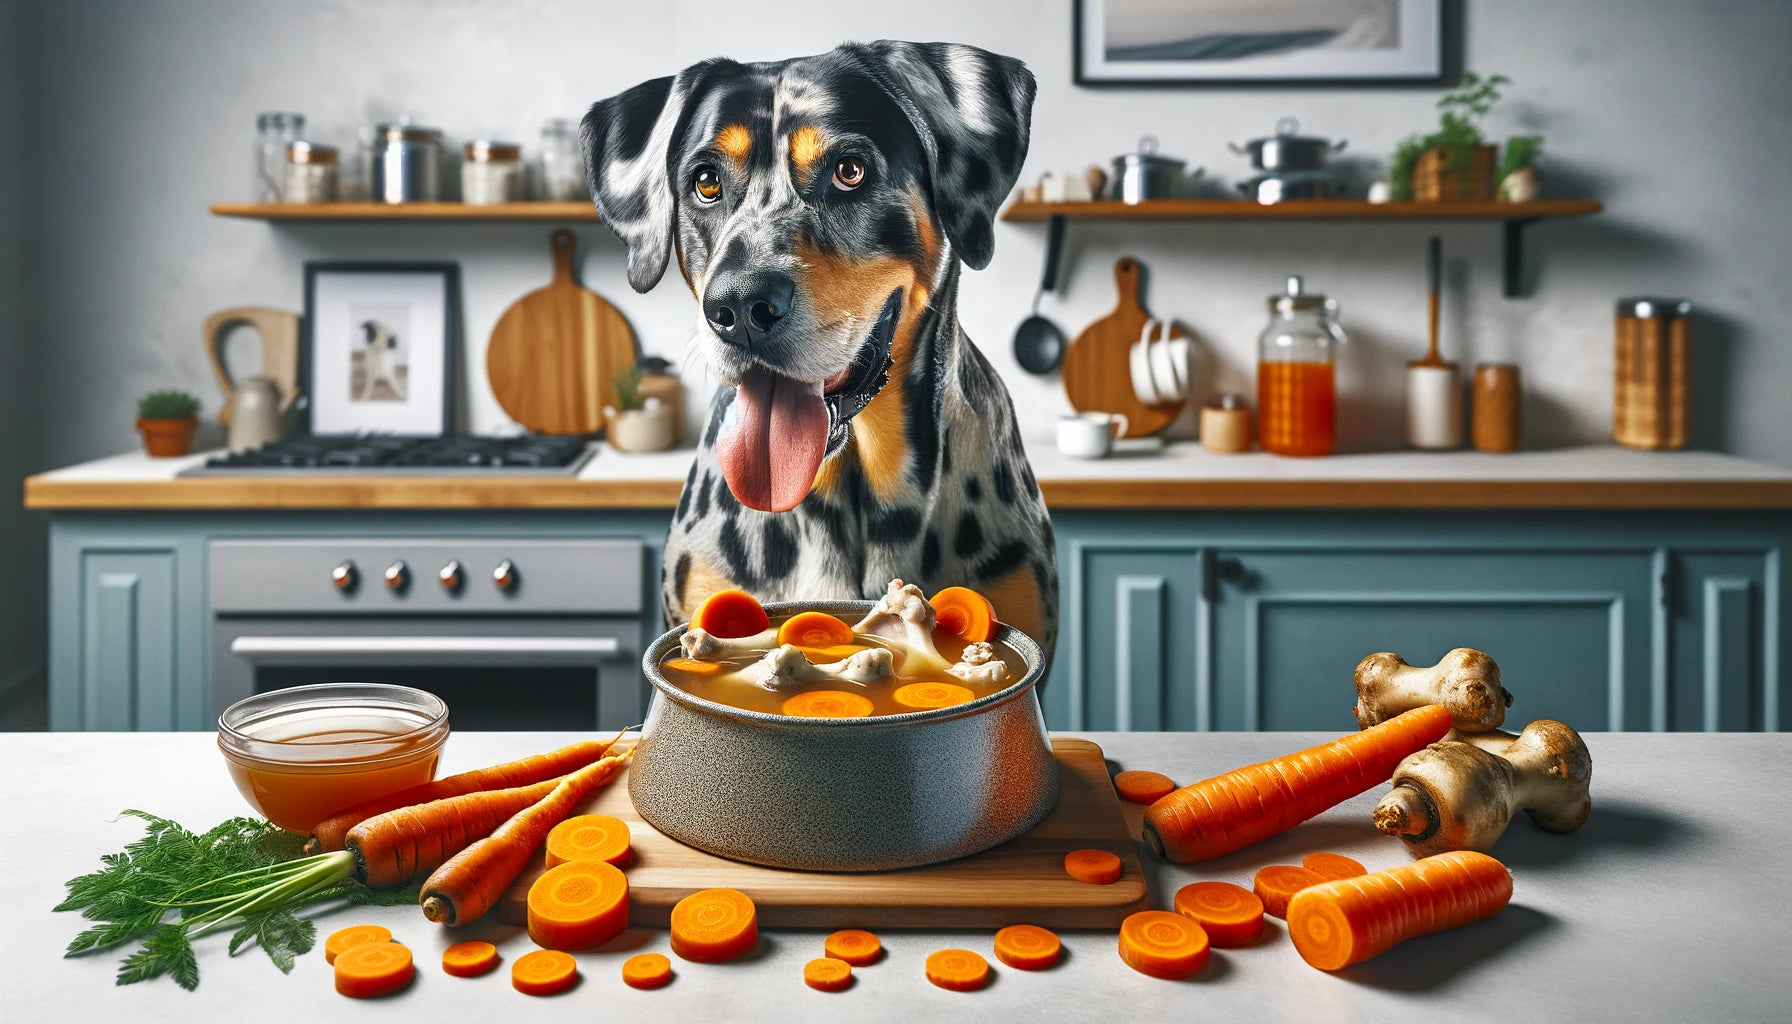 Carrot Beef Bone Broth in a dog's bowl with a Catahoula Leopard Dog sitting next to it.